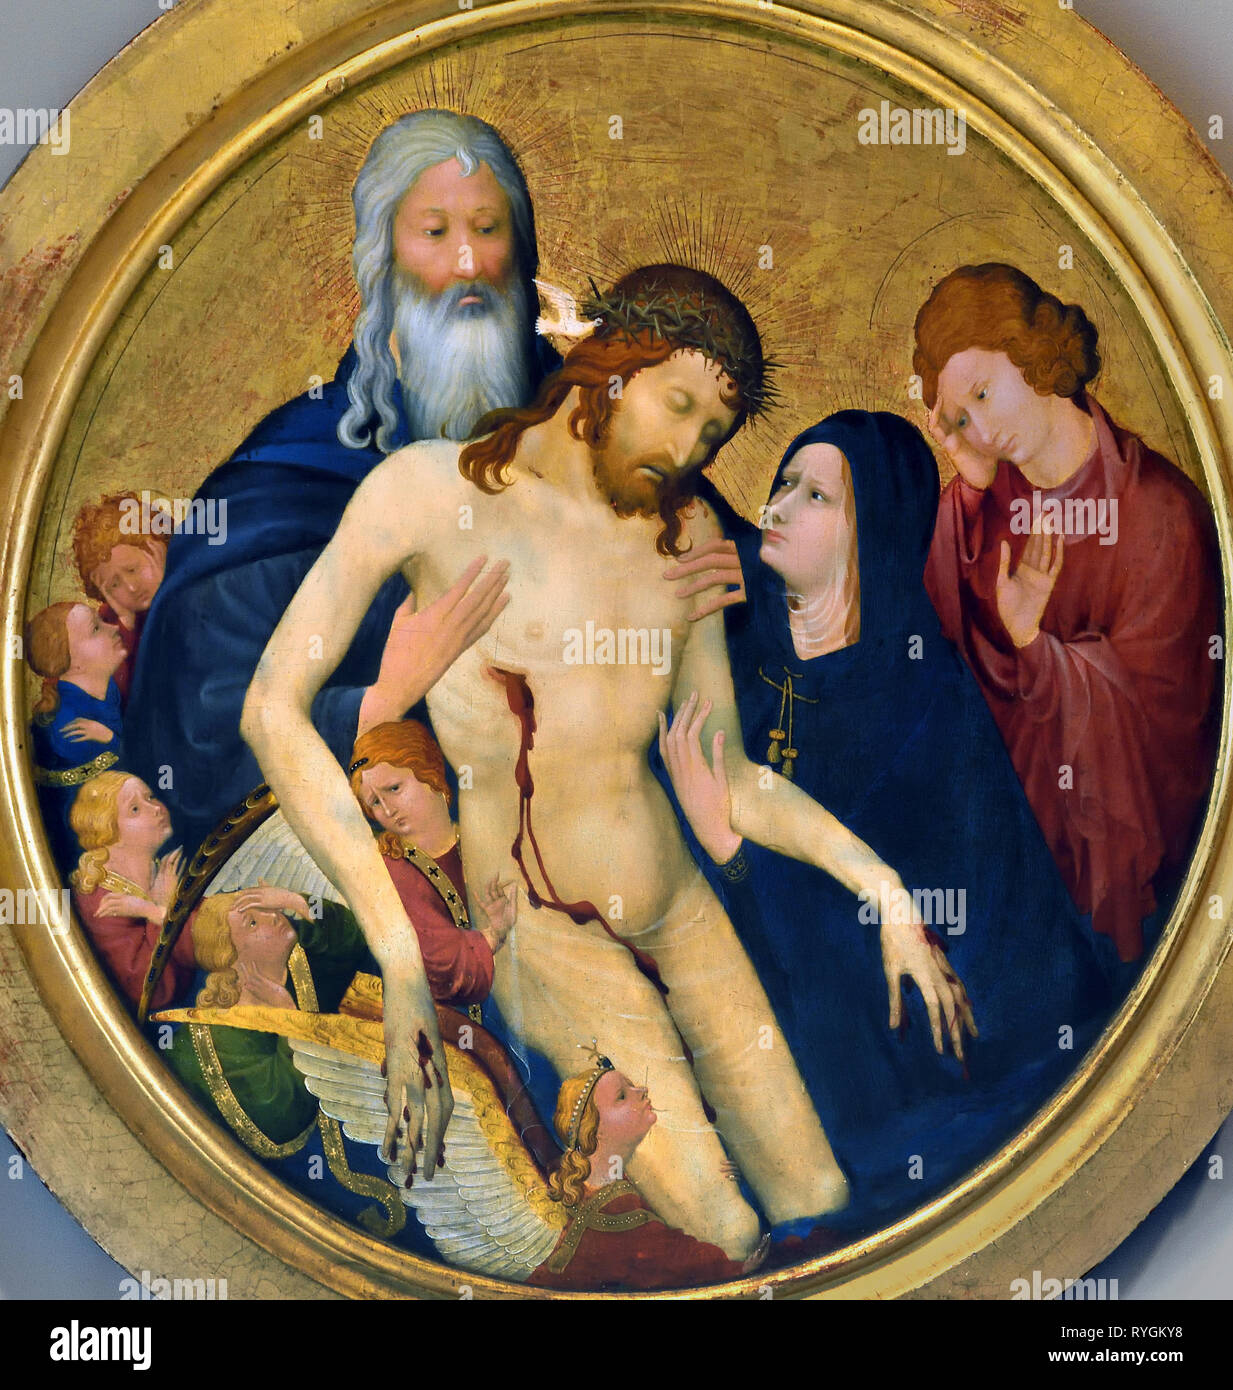 Pietà 1400 by  Jean MALOUEL 1365 – 1415  France, French, Dutch The Netherlands. ( Painted for Philippe le Hardi, Duc de Bourgogne (1363–1404), This 'Pity' combines the theme of the Man of Sorrows with the Trinity.) Stock Photo